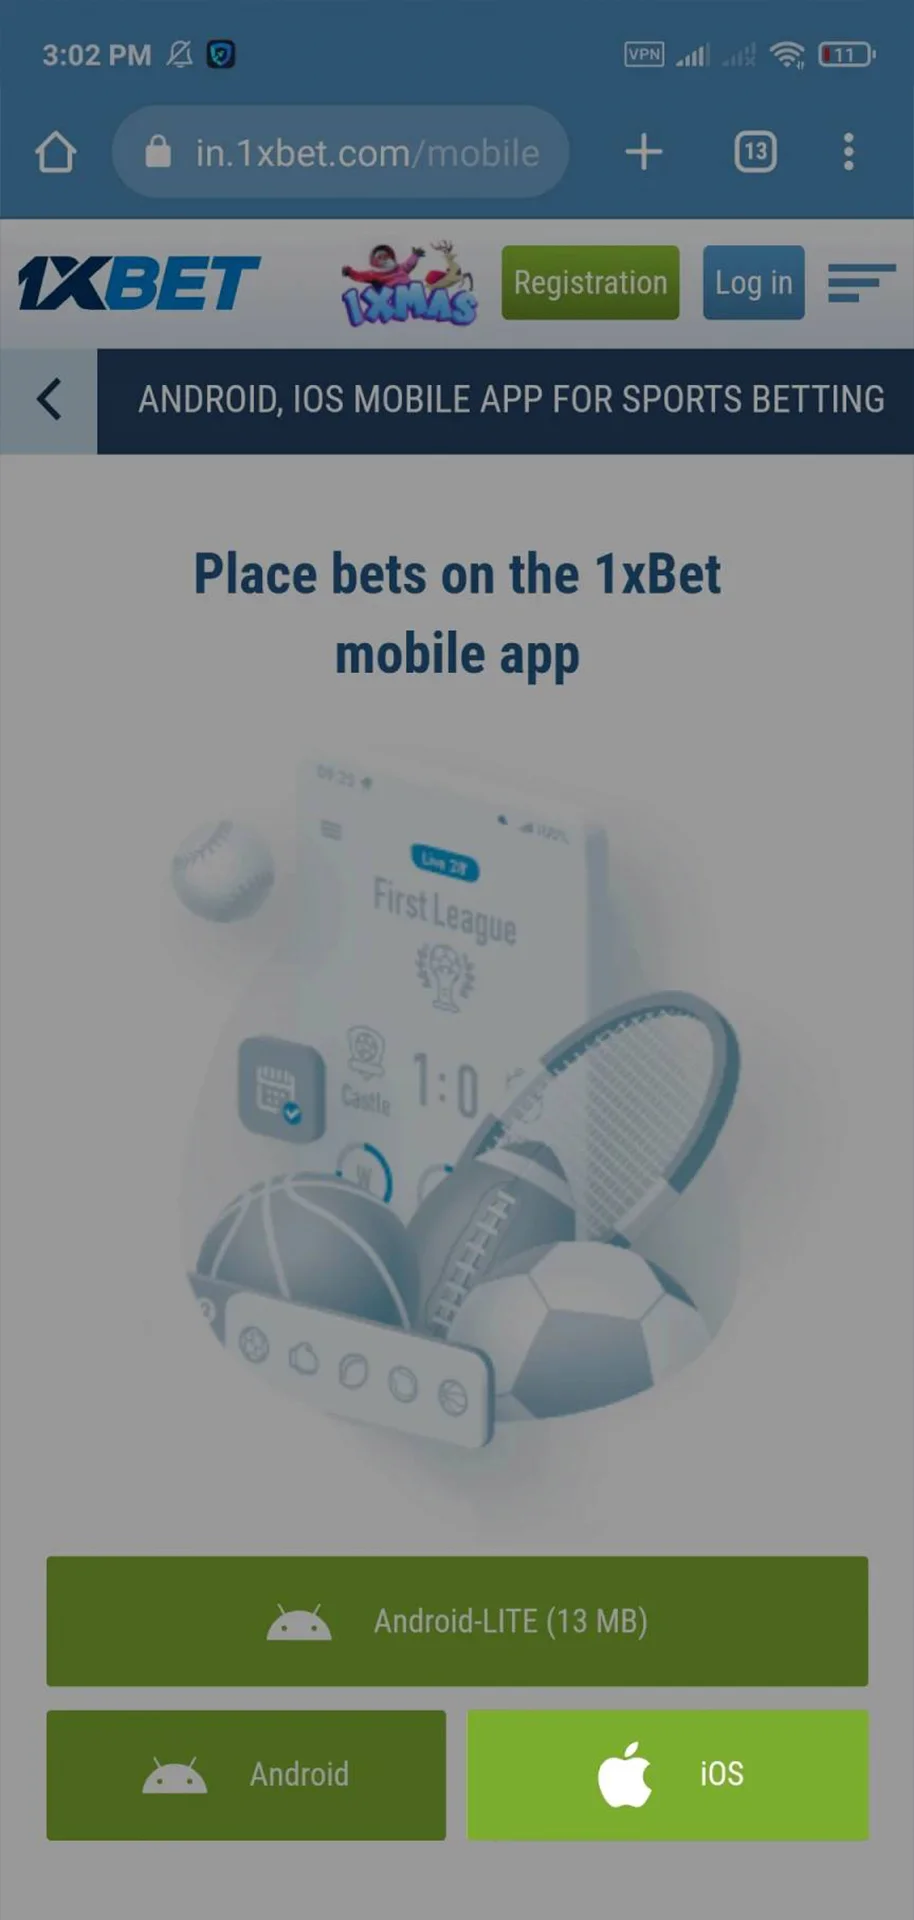 Download and install the 1xbet app on your smartphone.